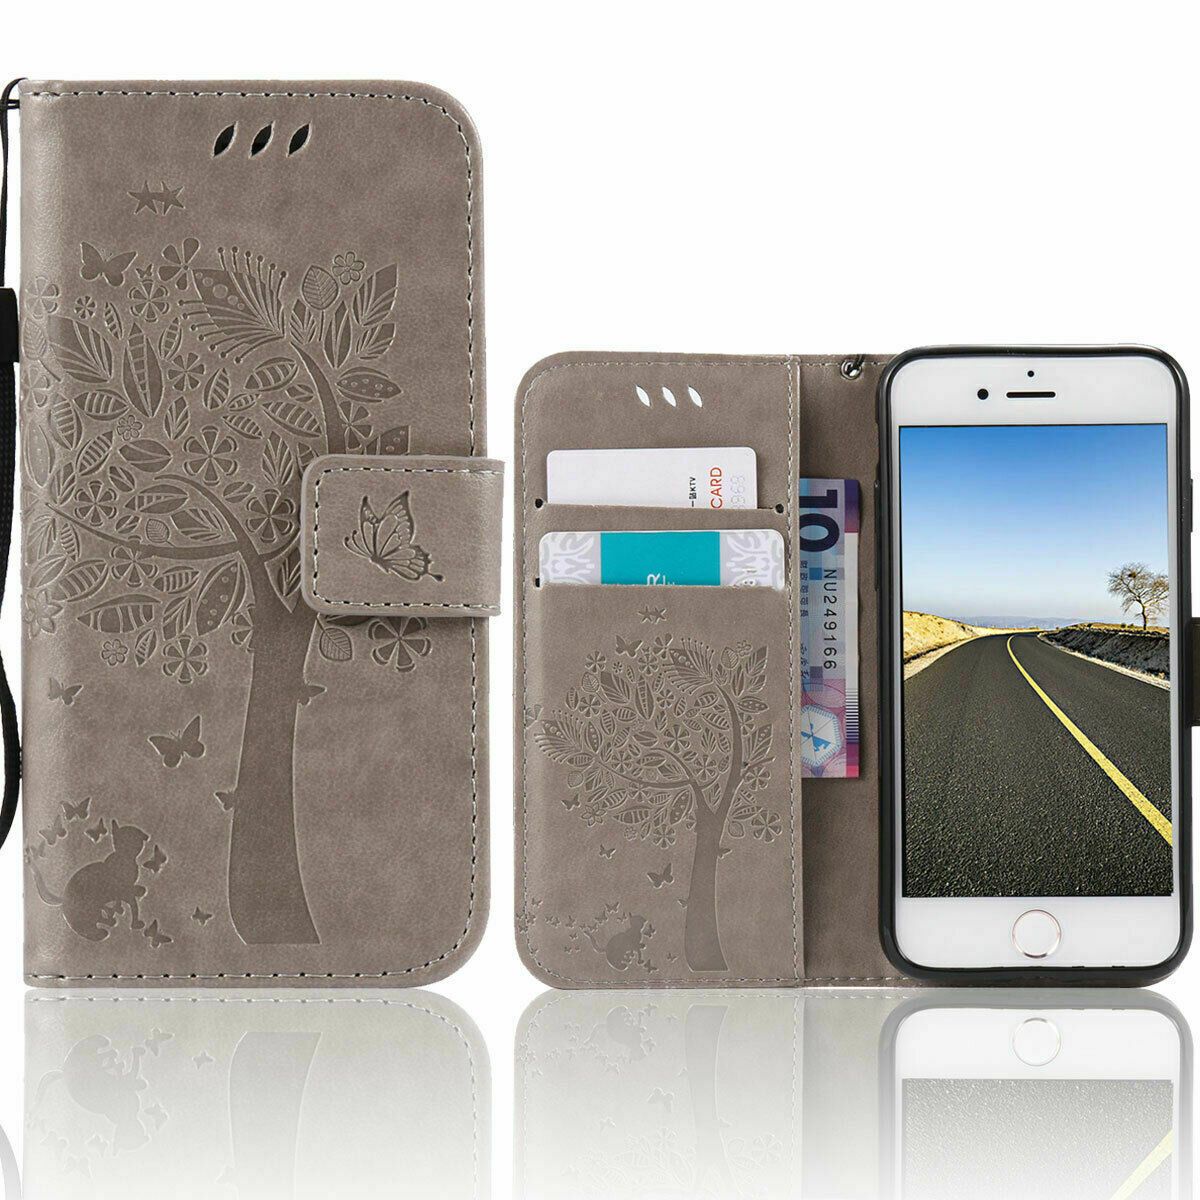 Magnetic Leather Wallet Case For iPhone 8 7 6s Plus X XS MAX XR Flip Cover Stand stekim-92 Gray iPhone6/6S 